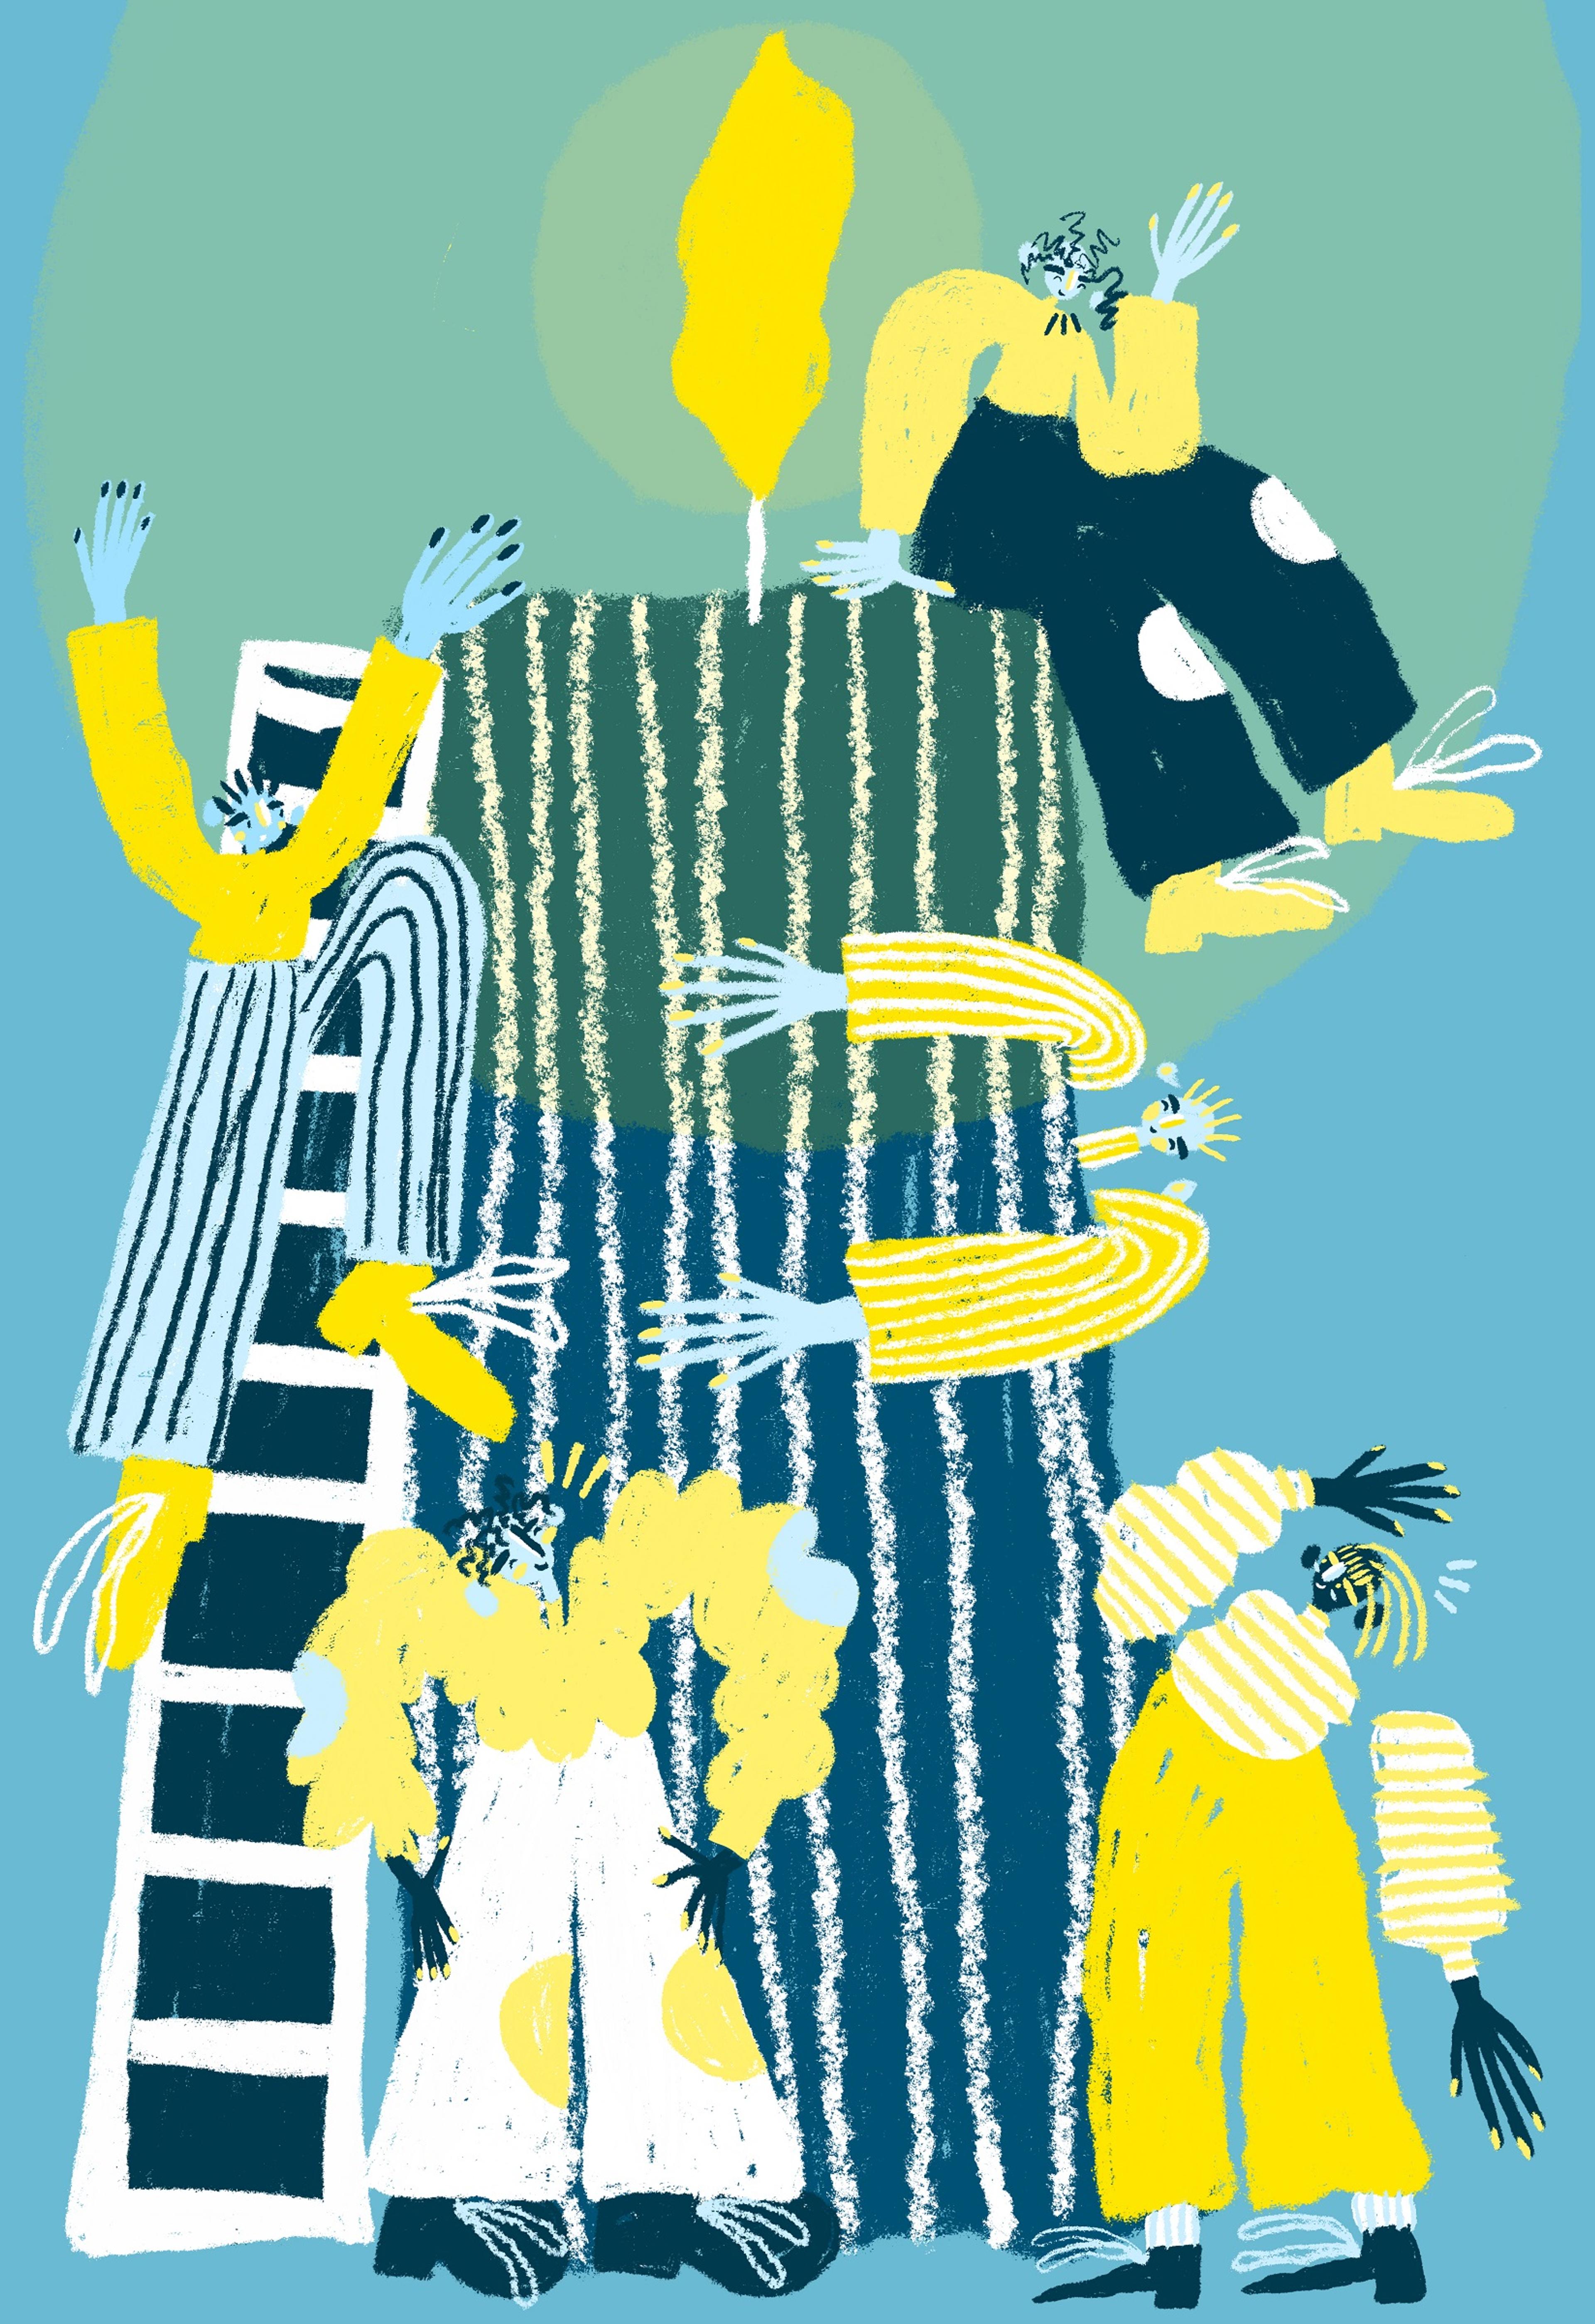 Illustration of characters climbing a stripy candle